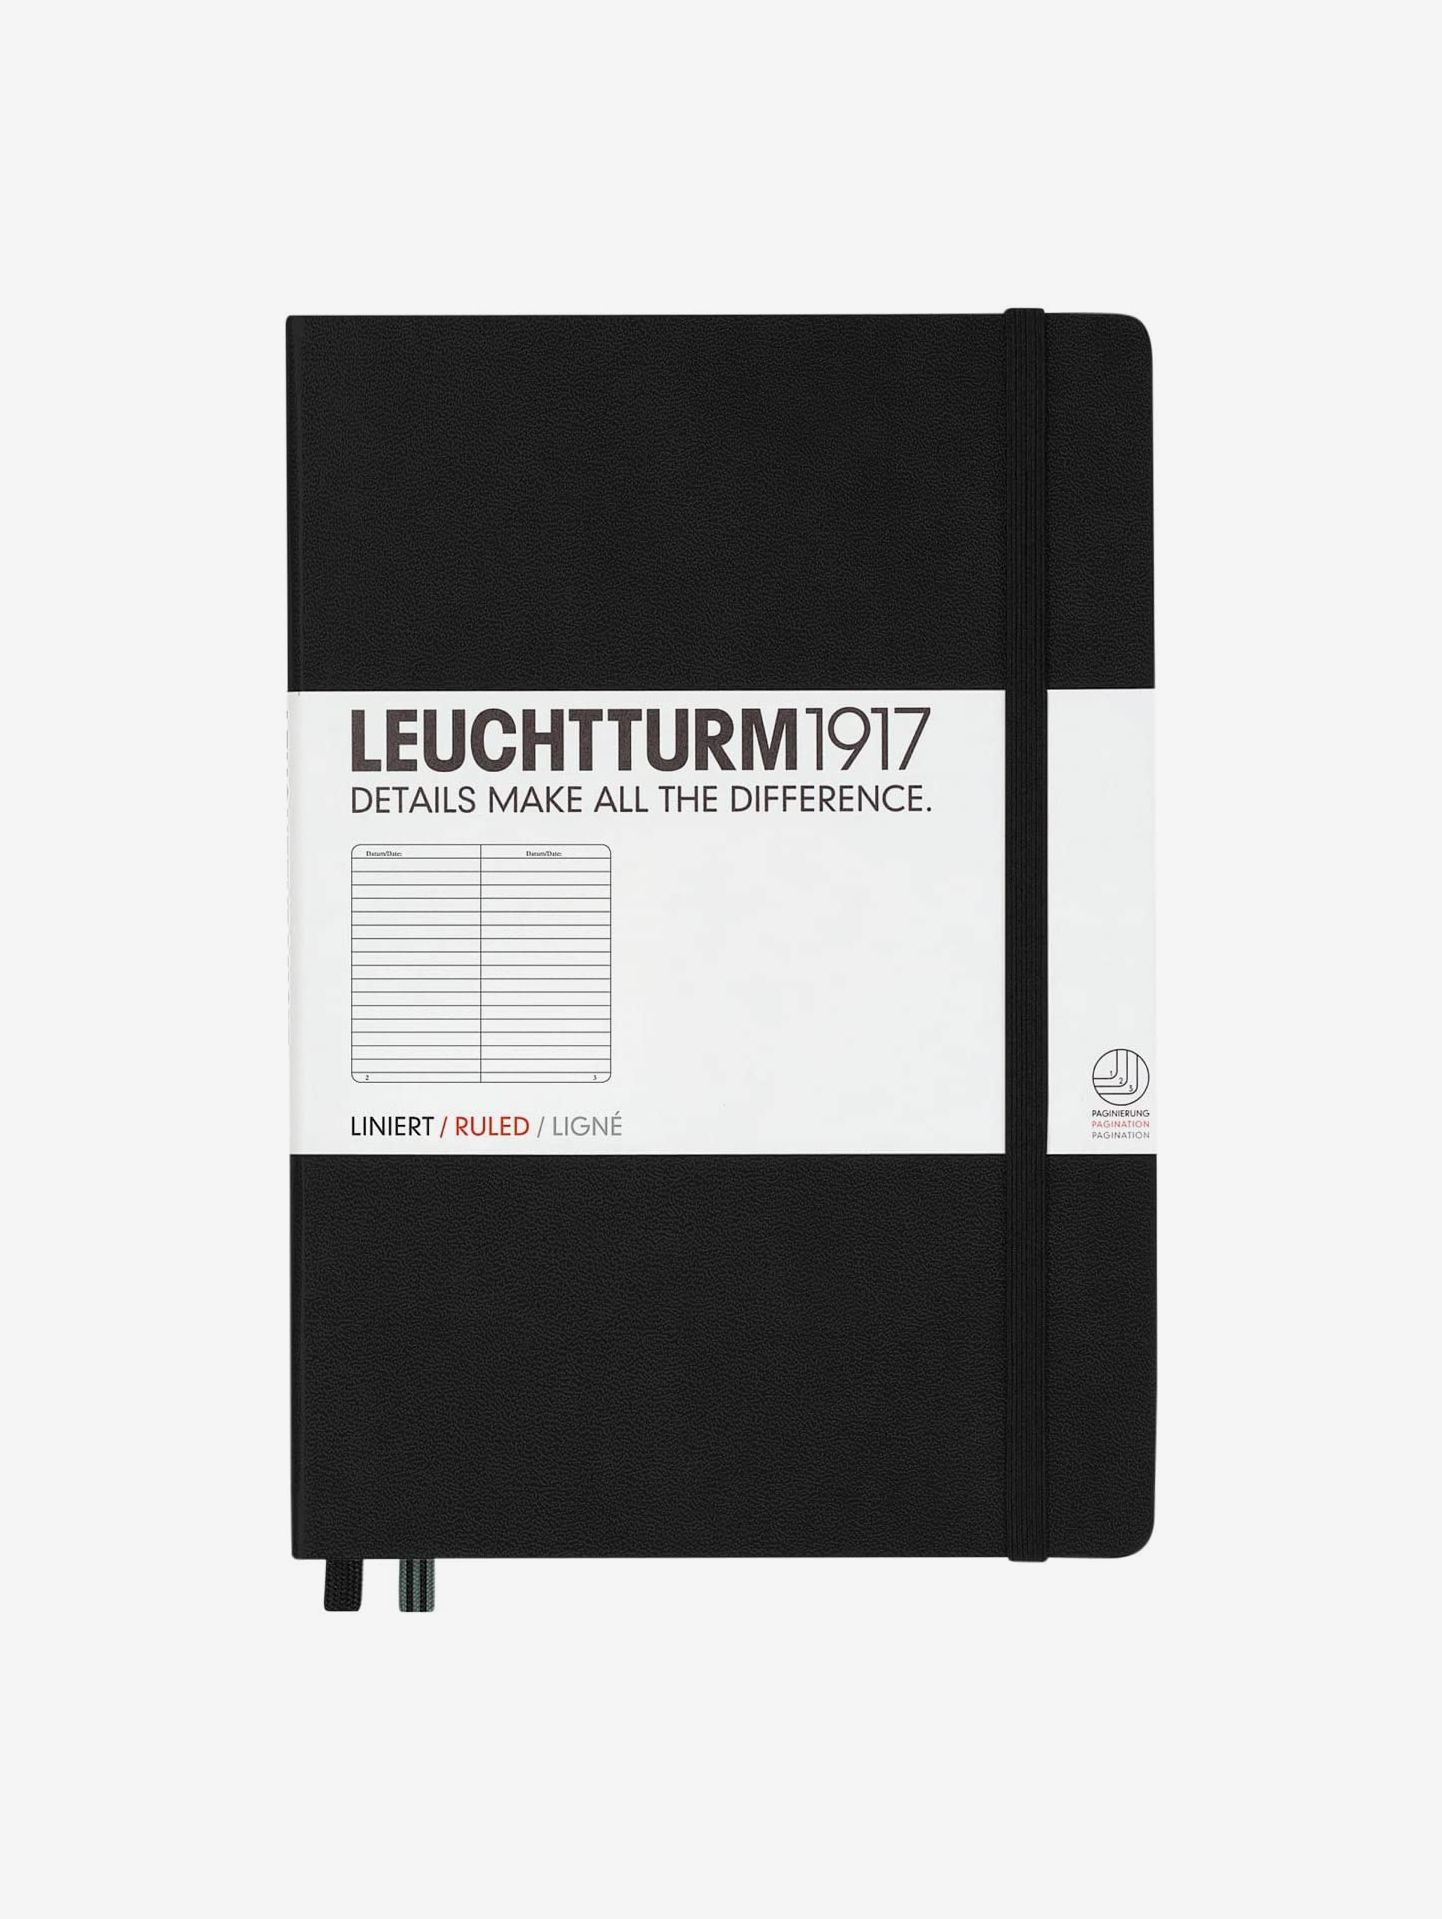 Best Selling Carbon Paper Notebook From All Leading Brands 